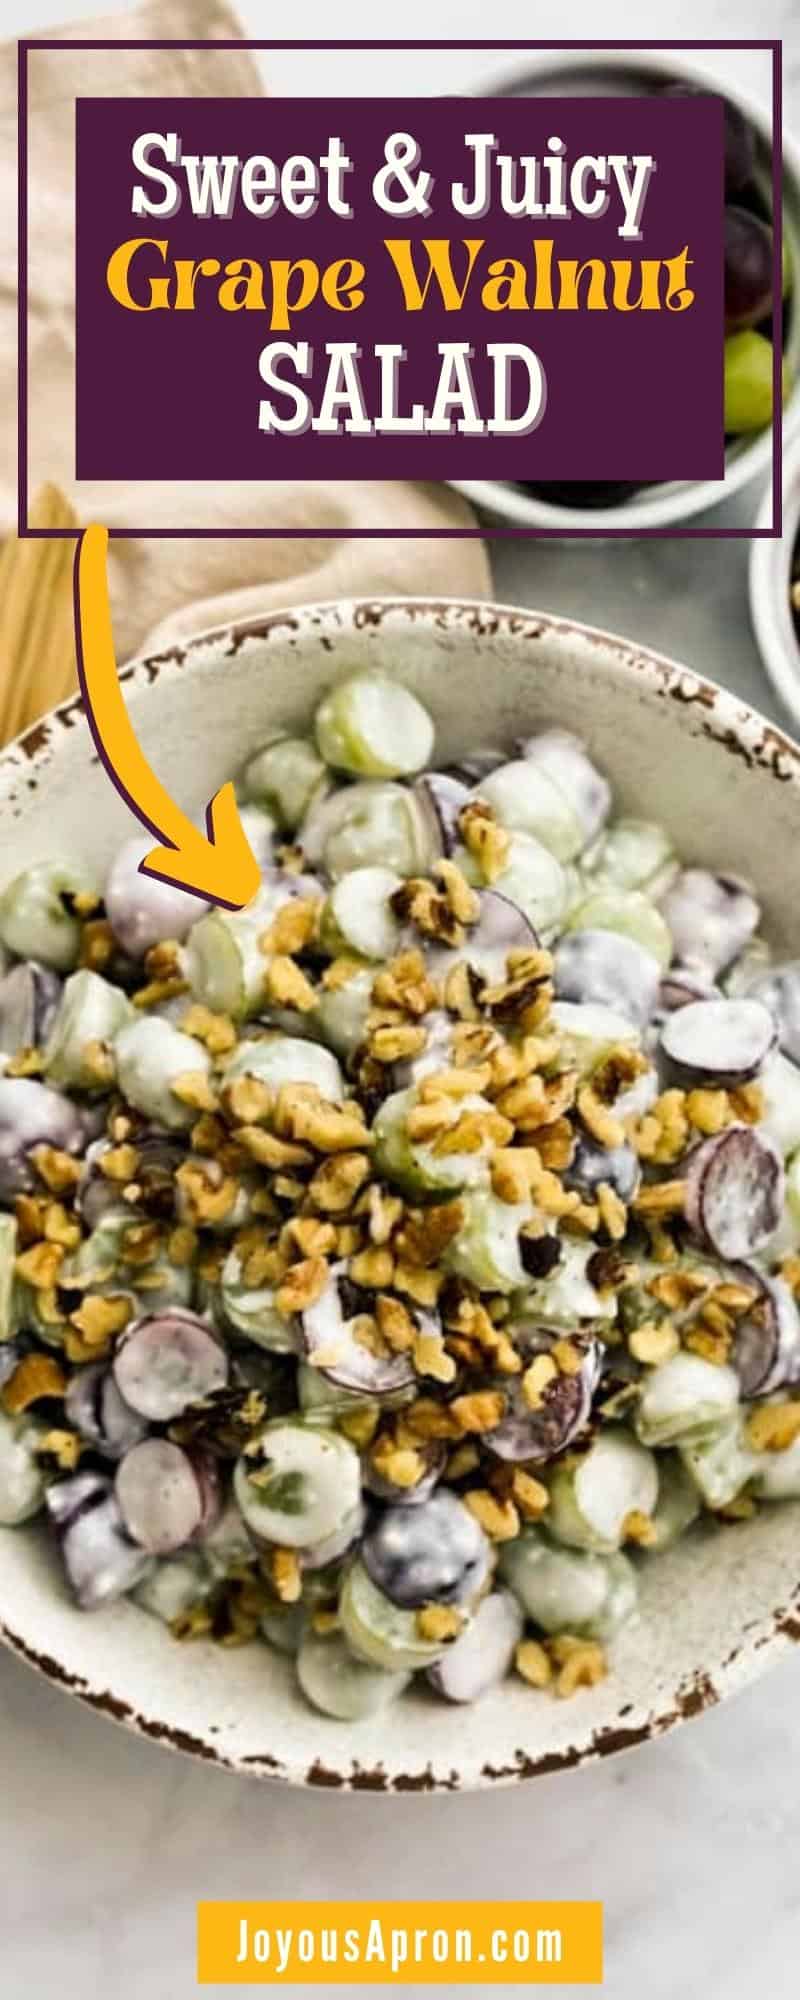 Grape Walnut Salad - easy, healthy and delicious fruit salad side dish for the summer. Red and green grapes tossed with walnuts in a creamy sweet and tangy dressing. Perfect for picnics, cookout and more! via @joyousapron